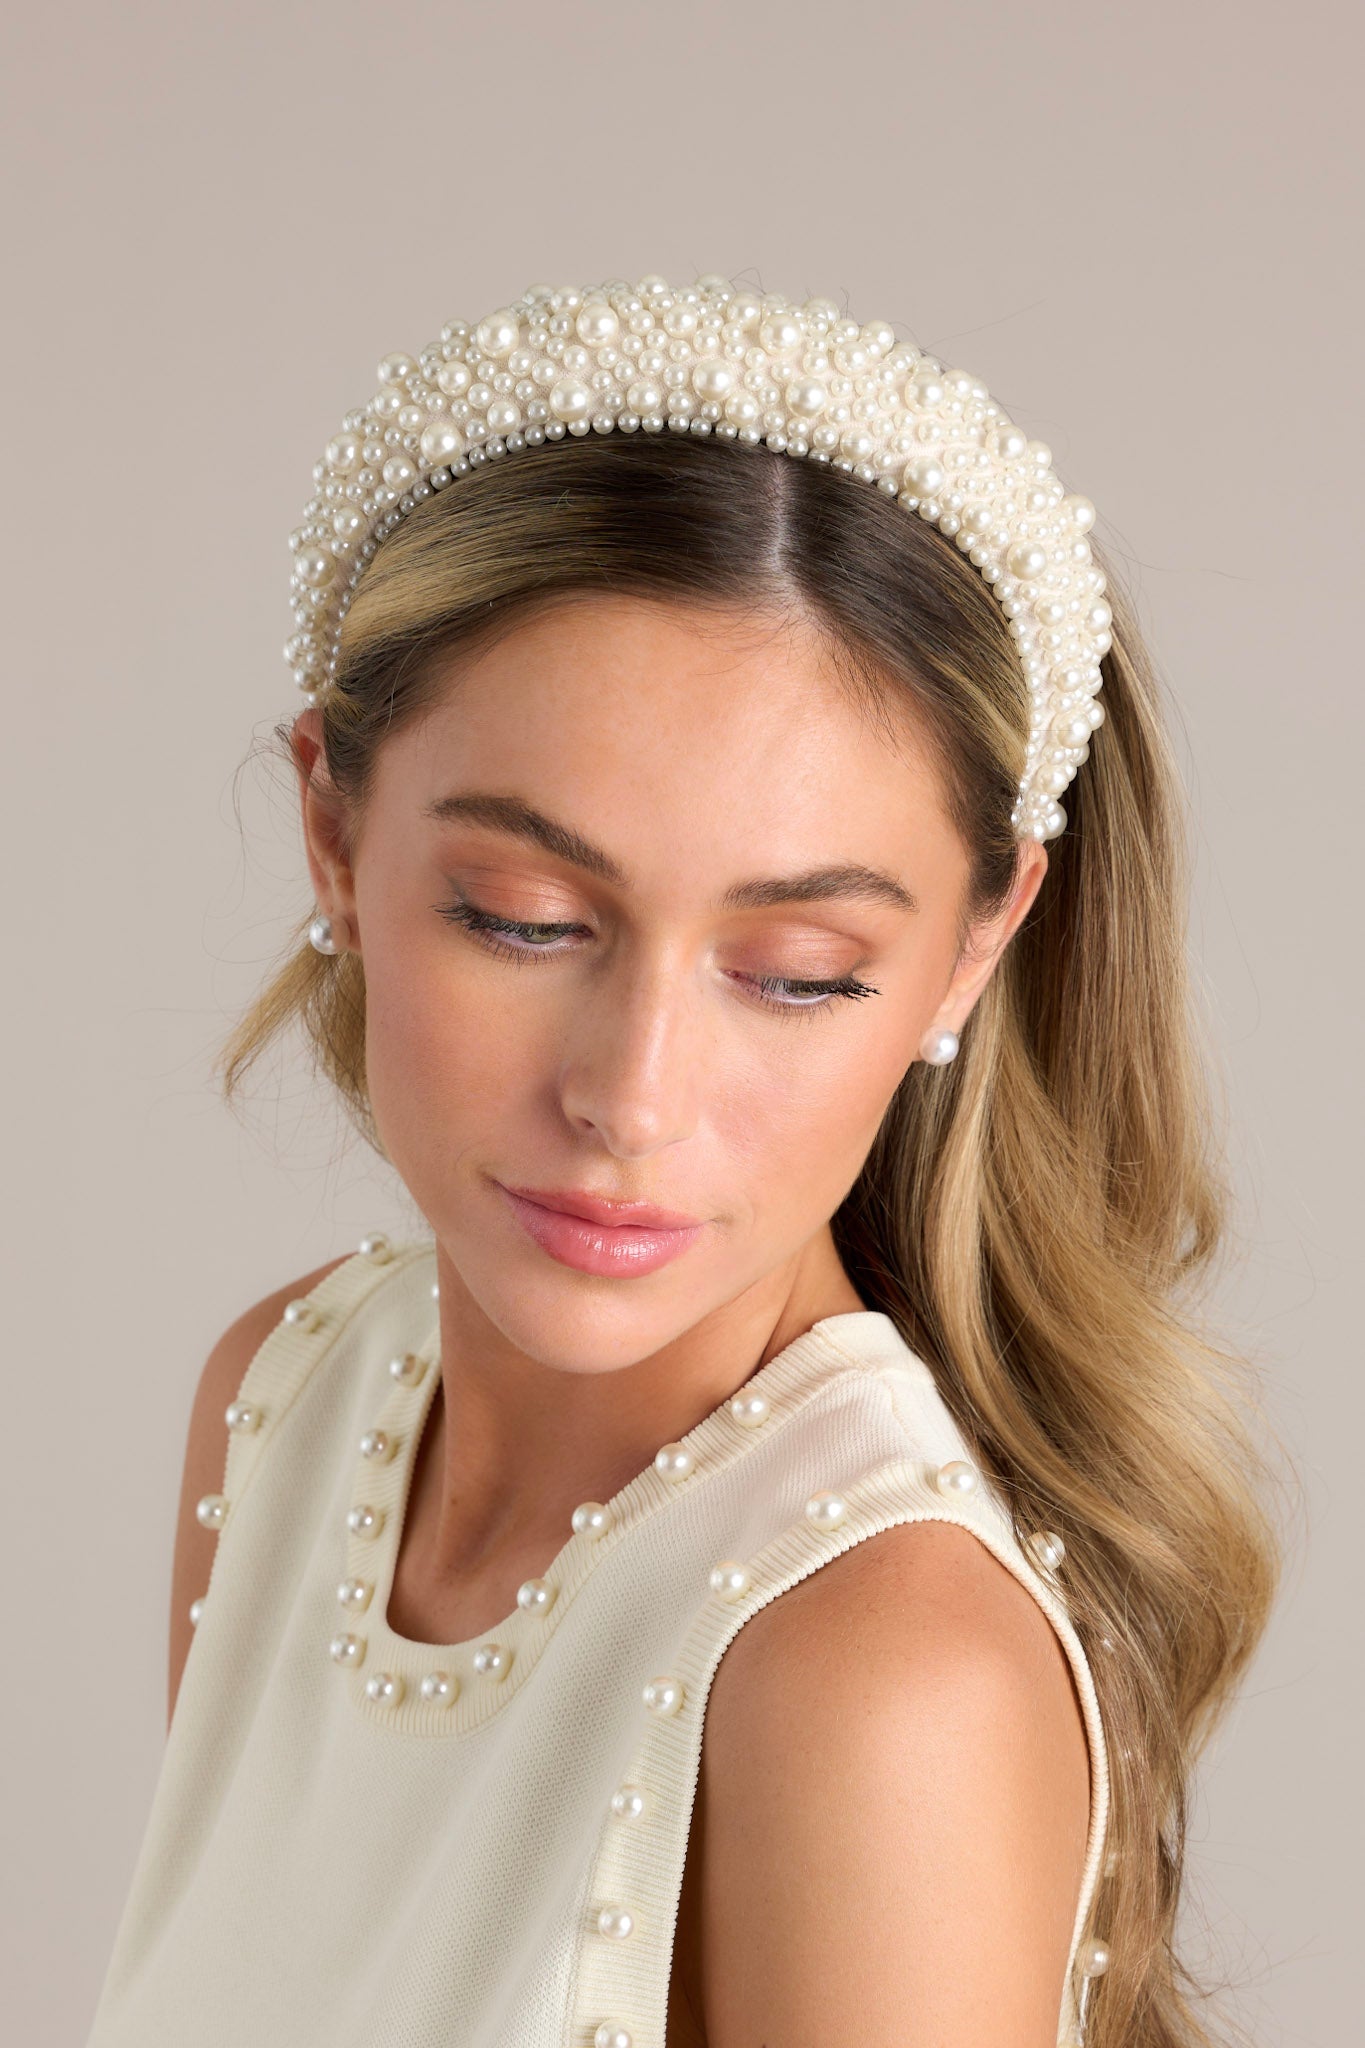 This headband is adorned with many white faux pearls varying in size, and a thick band.